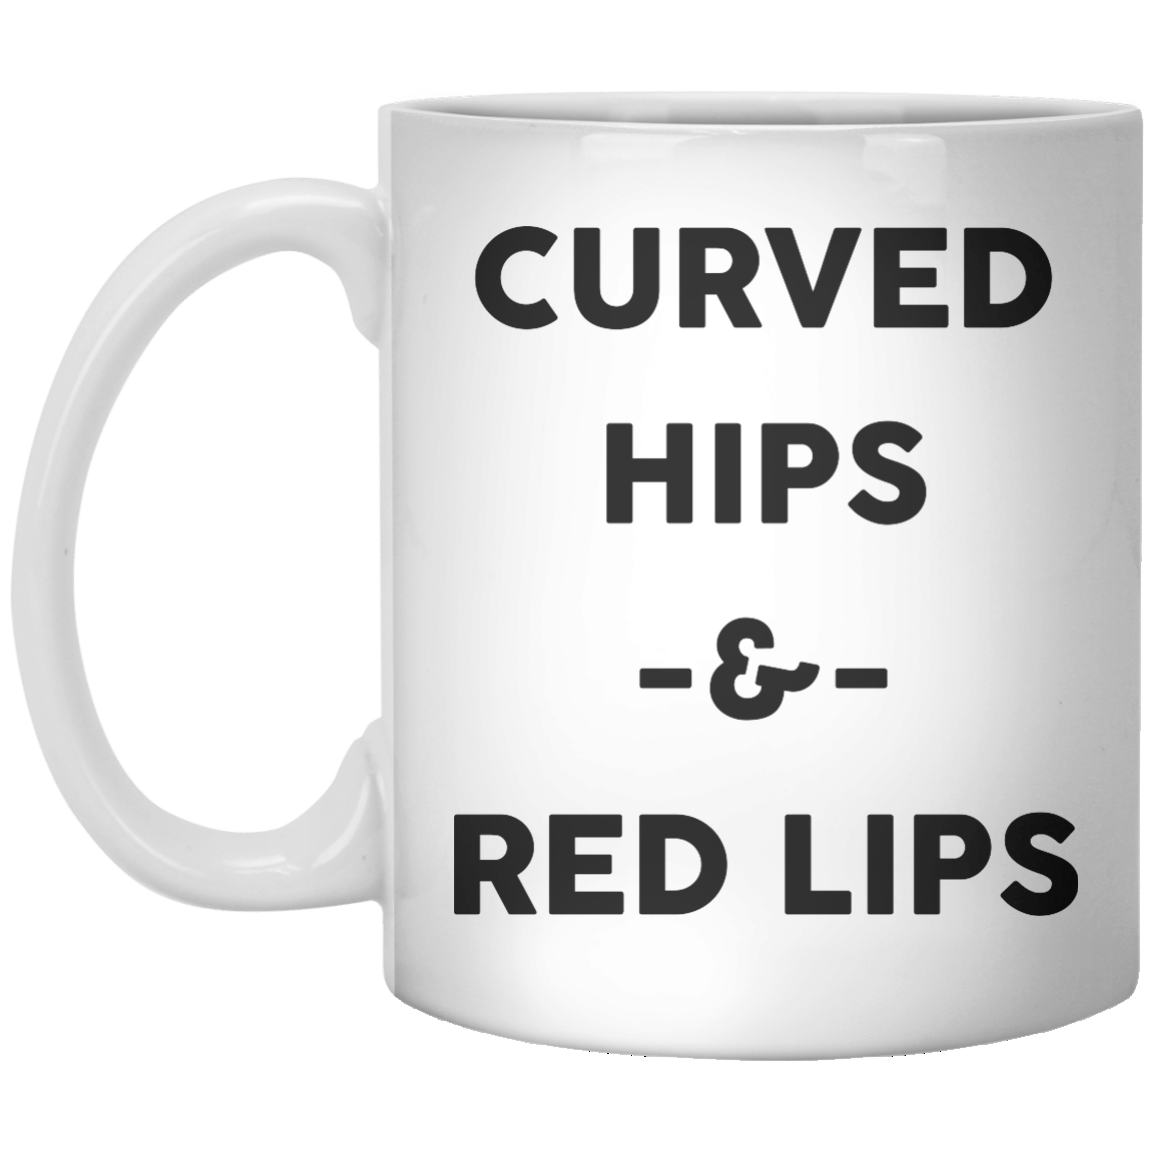 Curved hips and red lips - Shirtoopia